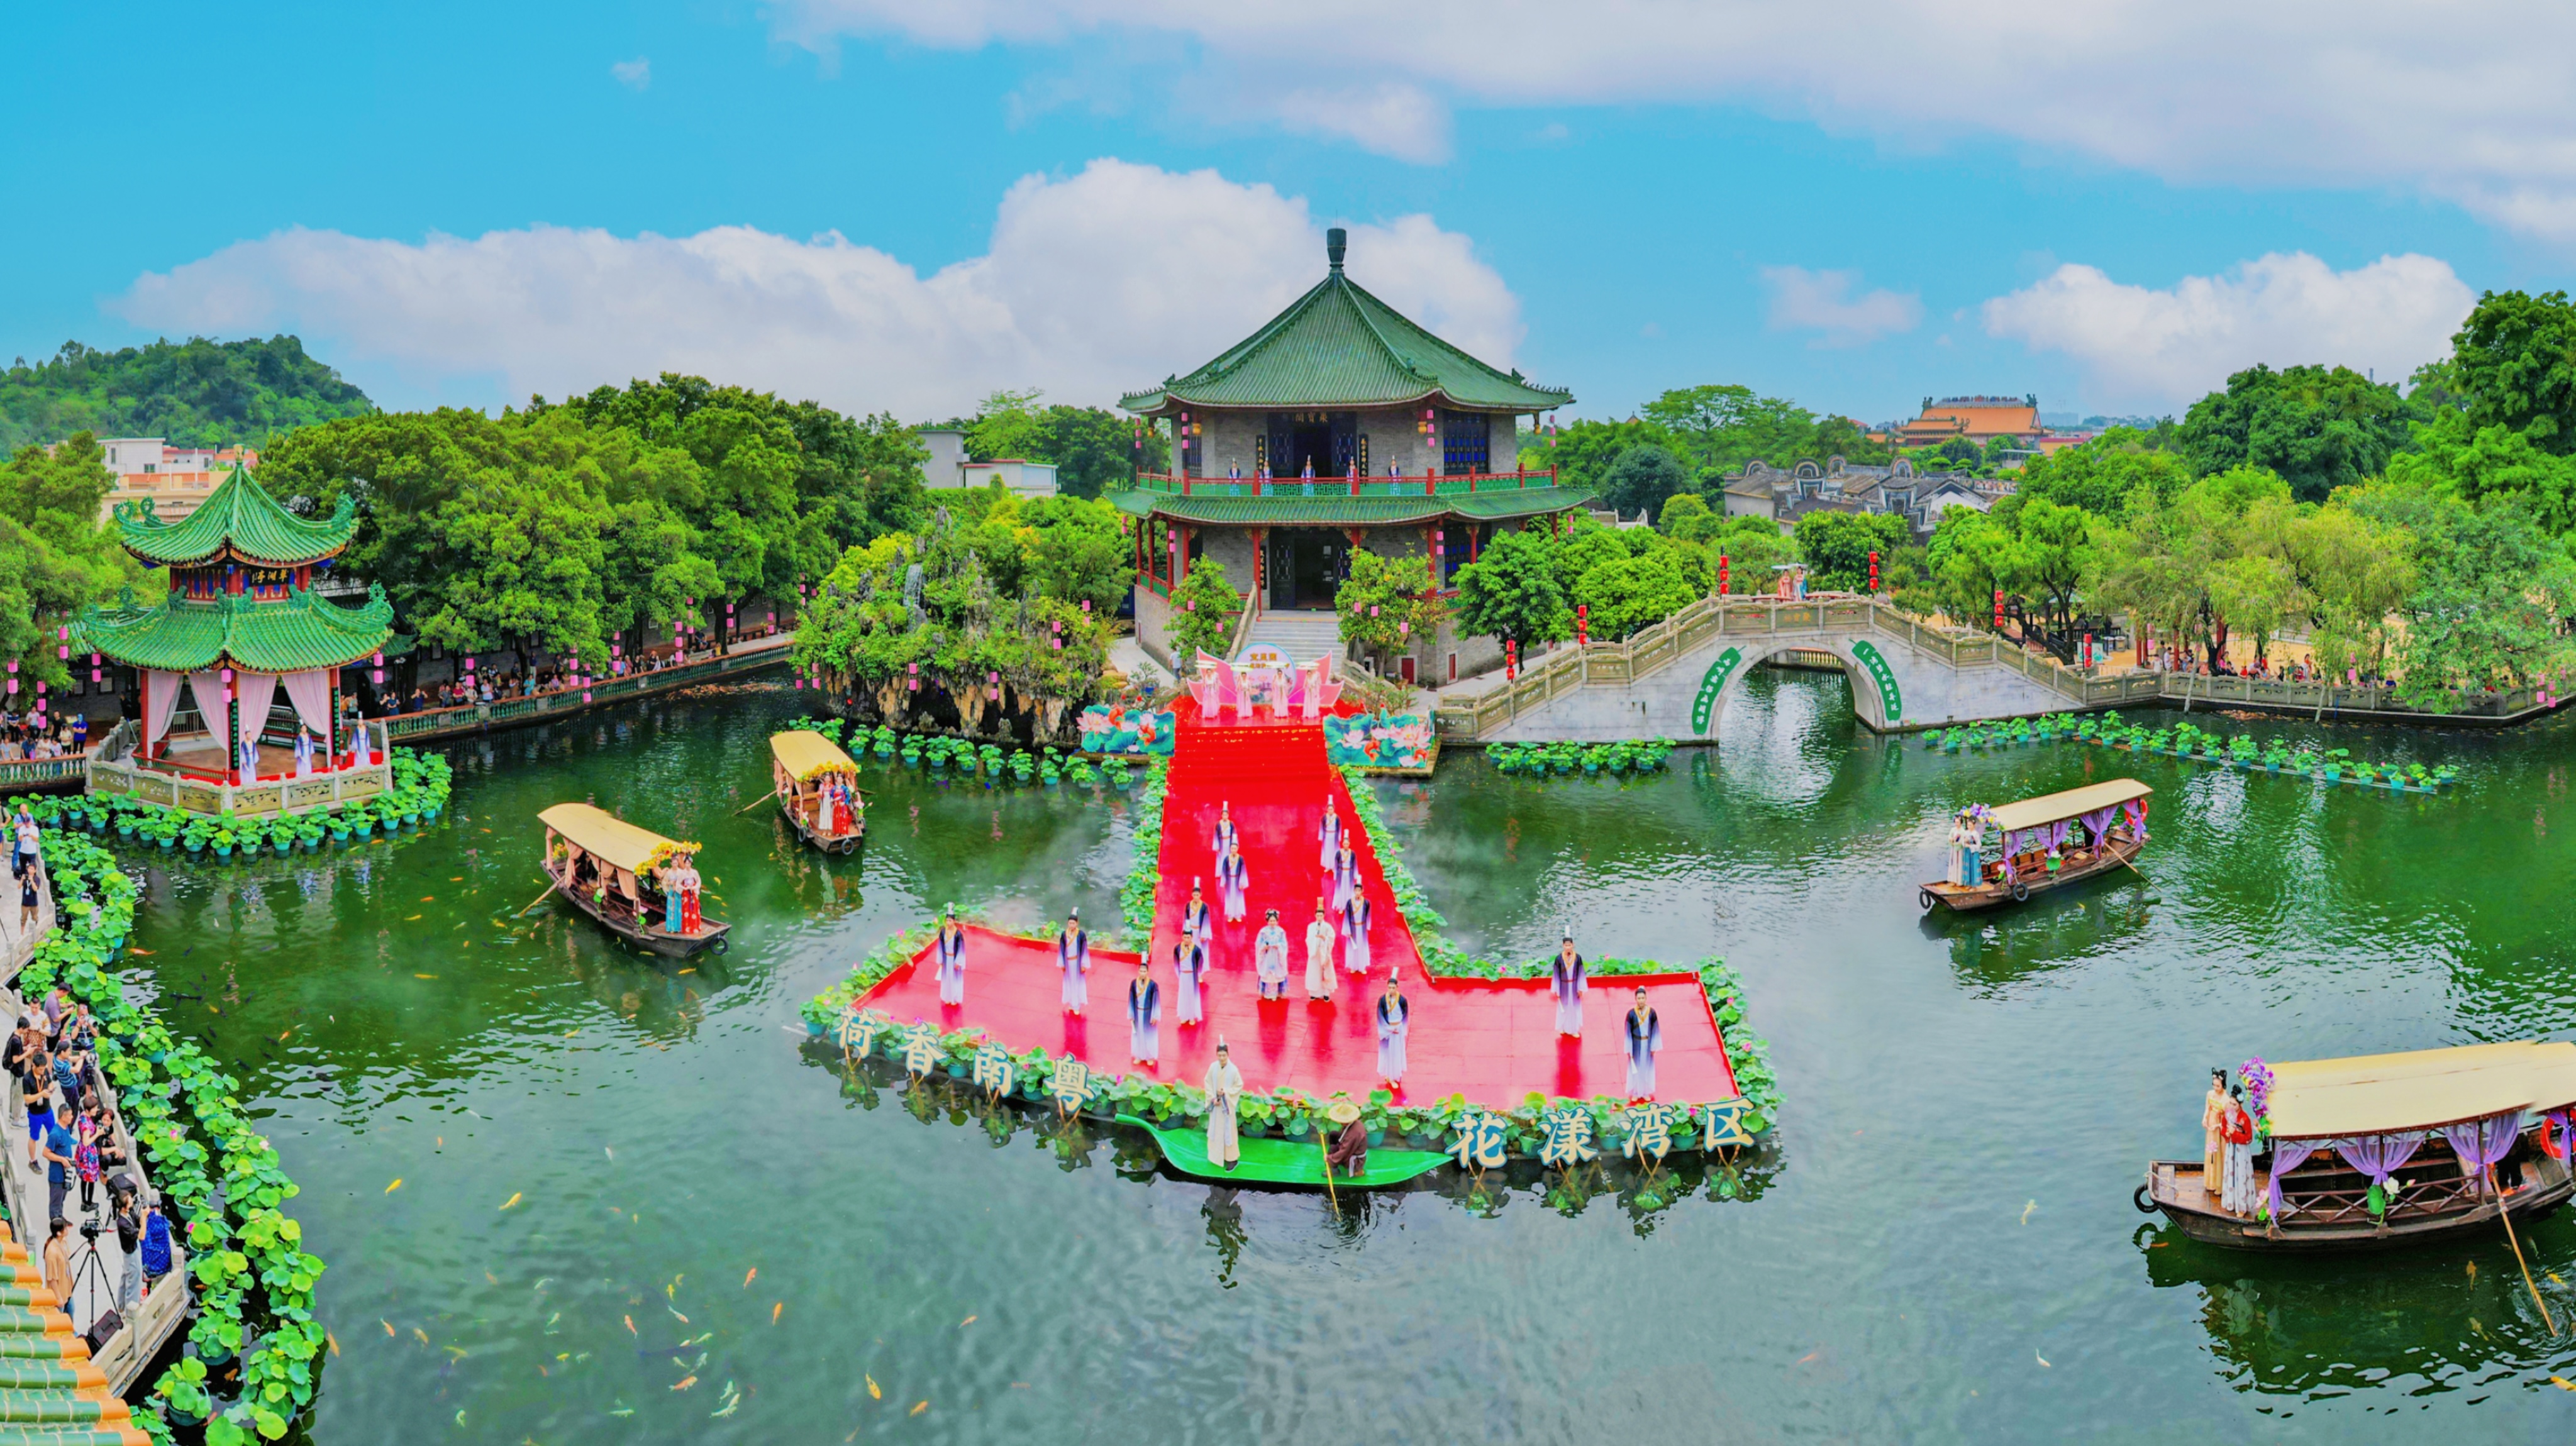 Despite rainy weather, Guangdong attractions remain popular during May Day holiday